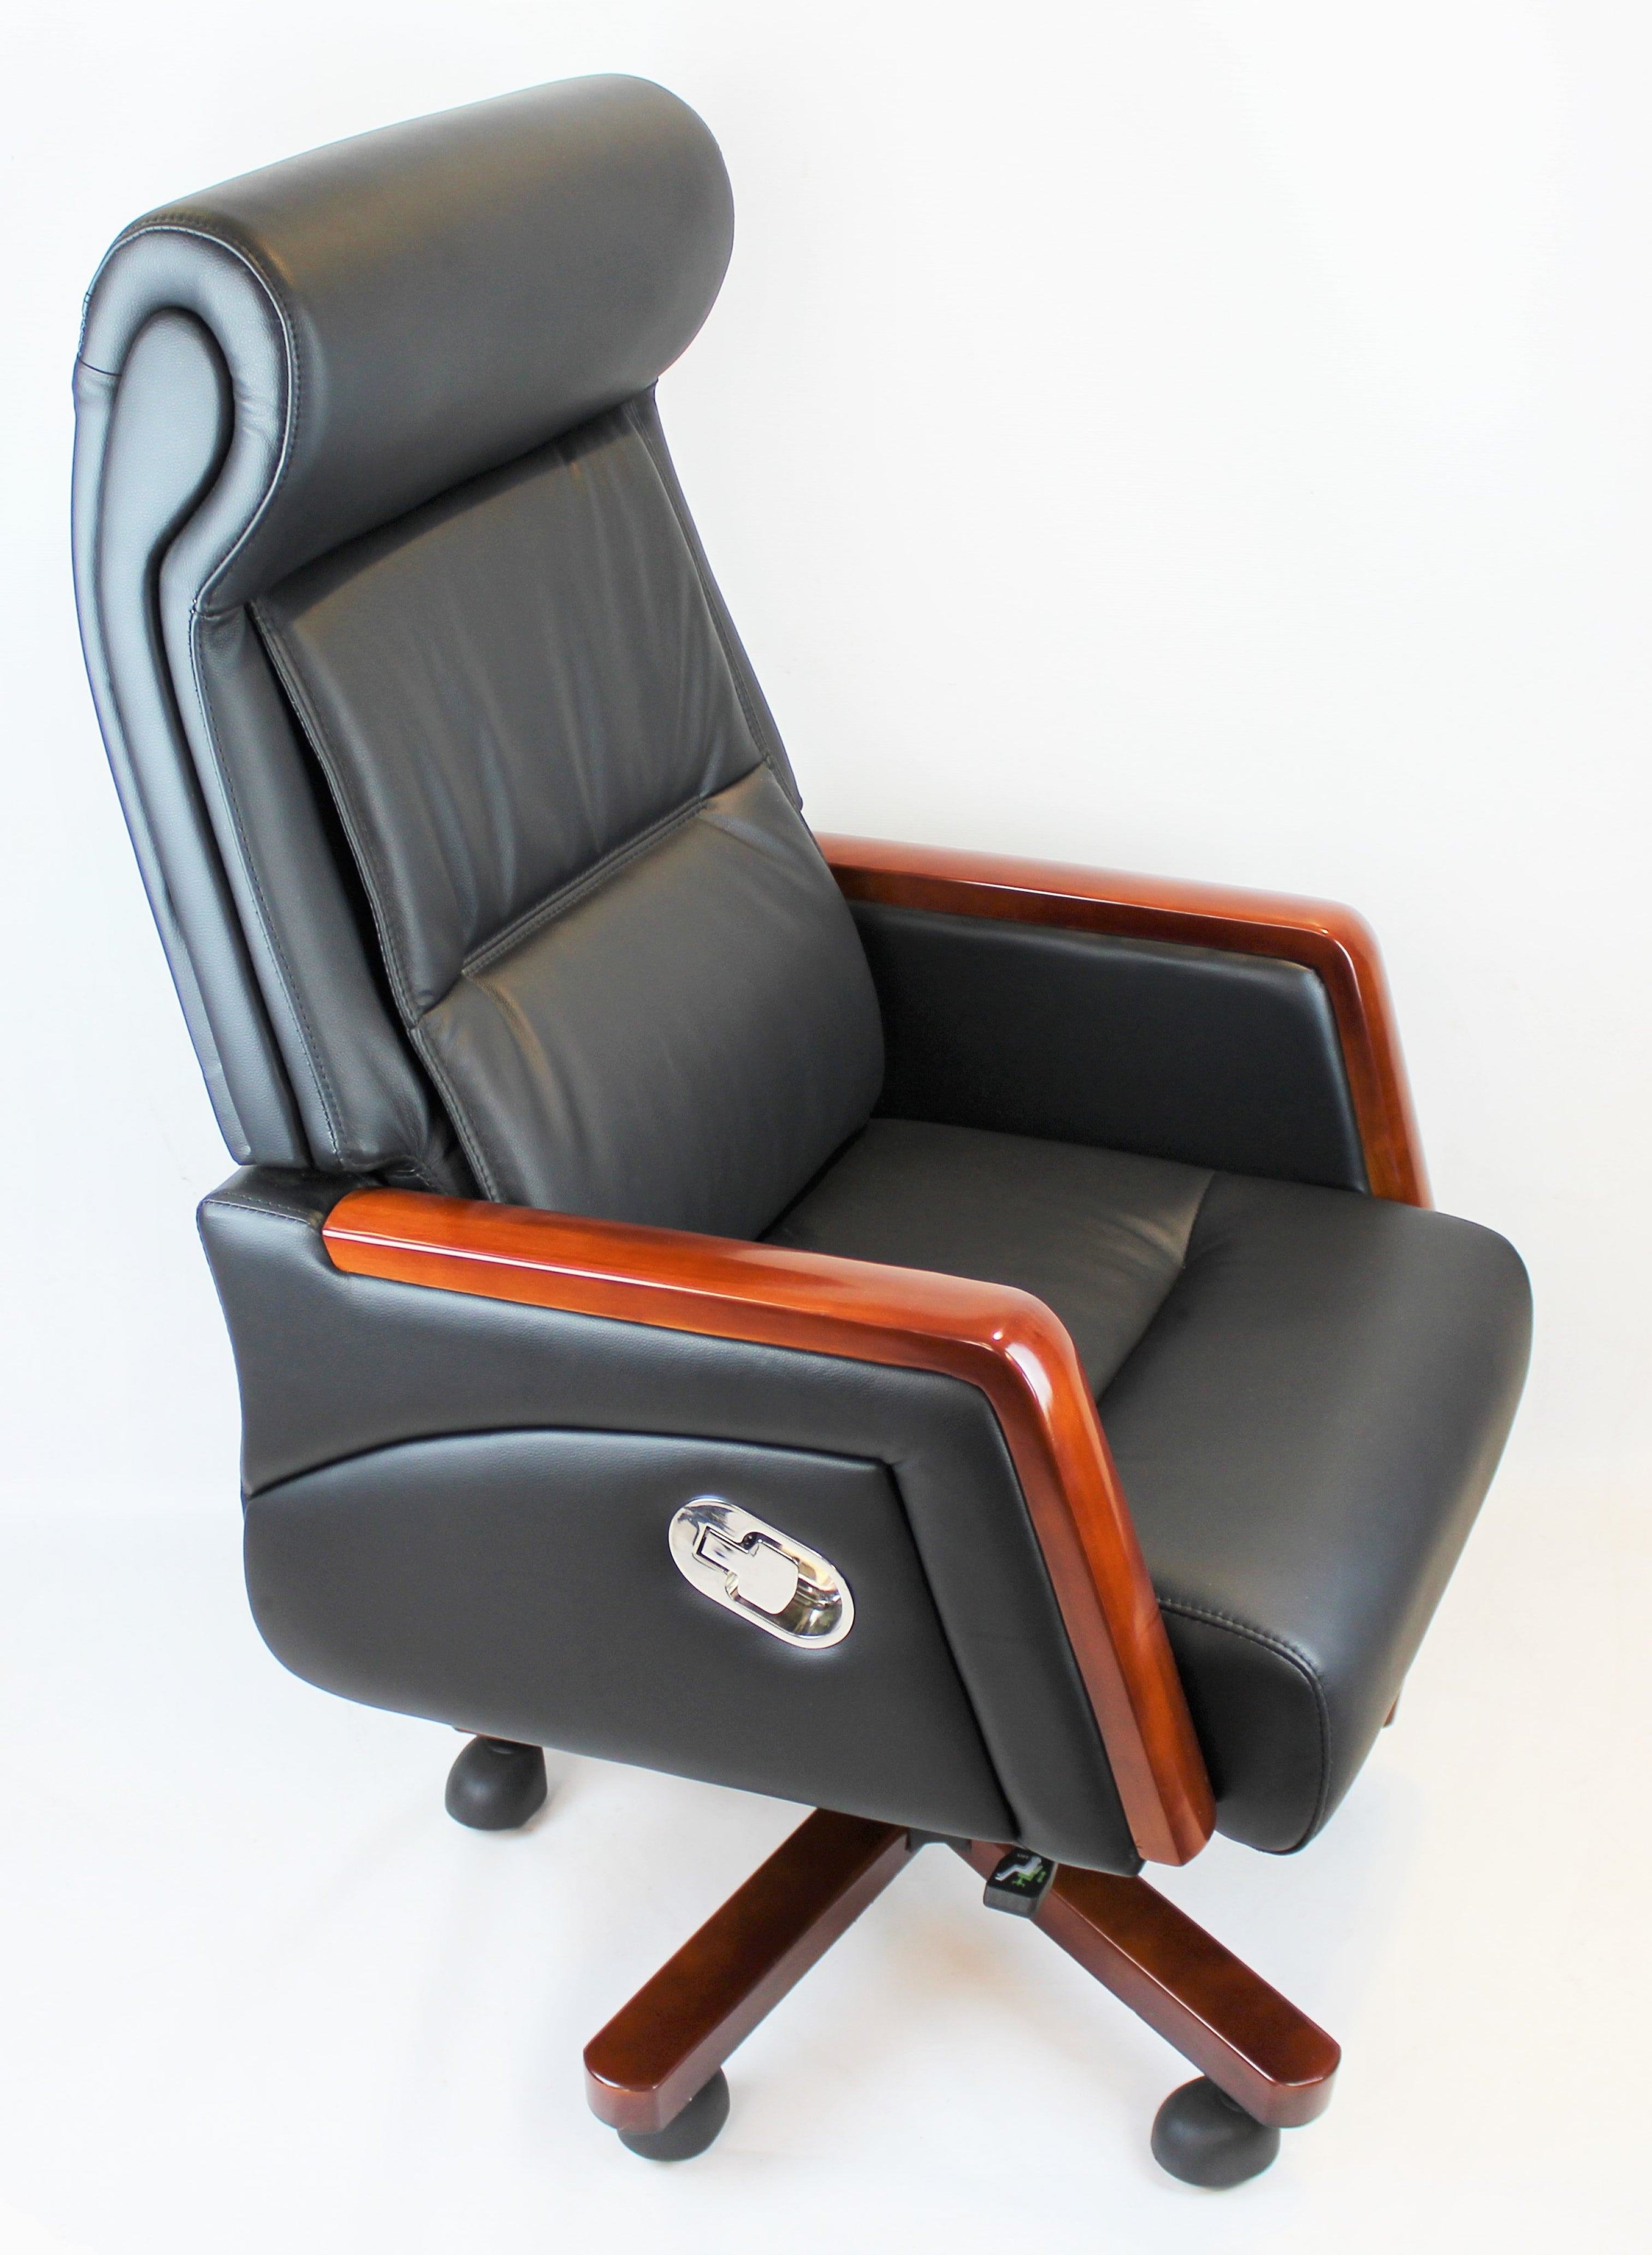 Reclining Black Leather Executive Office Chair with Wooden Arms - SZ-A109 UK